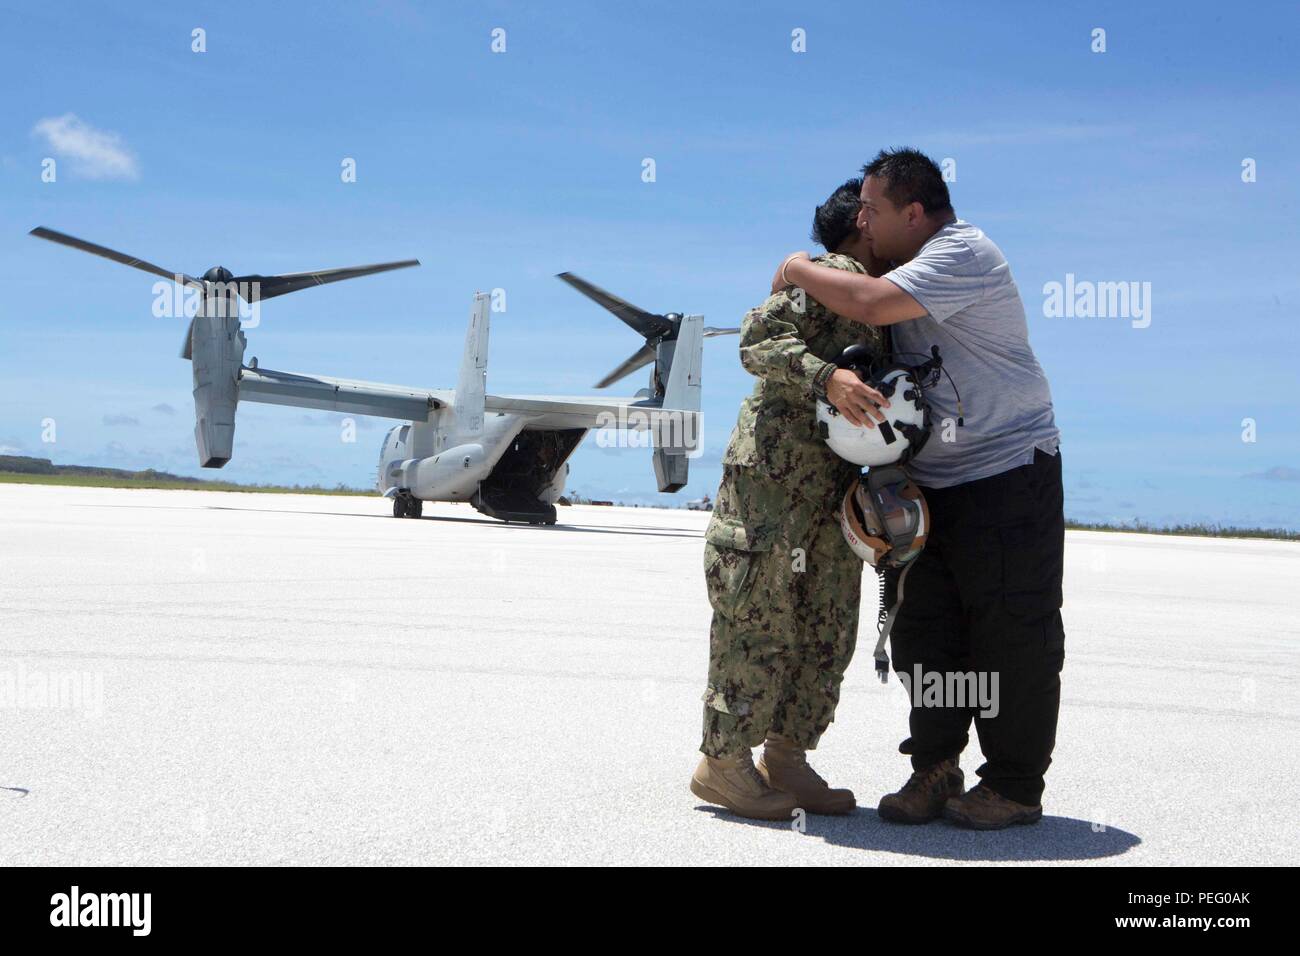 Ralph Torres, acting governor of Saipan, embraces U.S. Navy Rear Adm. Bette Bolivar, the commander of U.S. Naval Forces Marianas, after flying over areas of the island damaged by a typhoon Aug. 9, 2015. The 31st Marine Expeditionary Unit and the ships of the Bonhomme Richard Amphibious Ready Group are assisting federal and local agencies with distributing emergency relief supplies to Saipan after it was struck by Typhoon Soudelor Aug. 2-3. (U.S. Marine Corps photo by Lance Cpl. Brian Bekkala/Released) Stock Photo